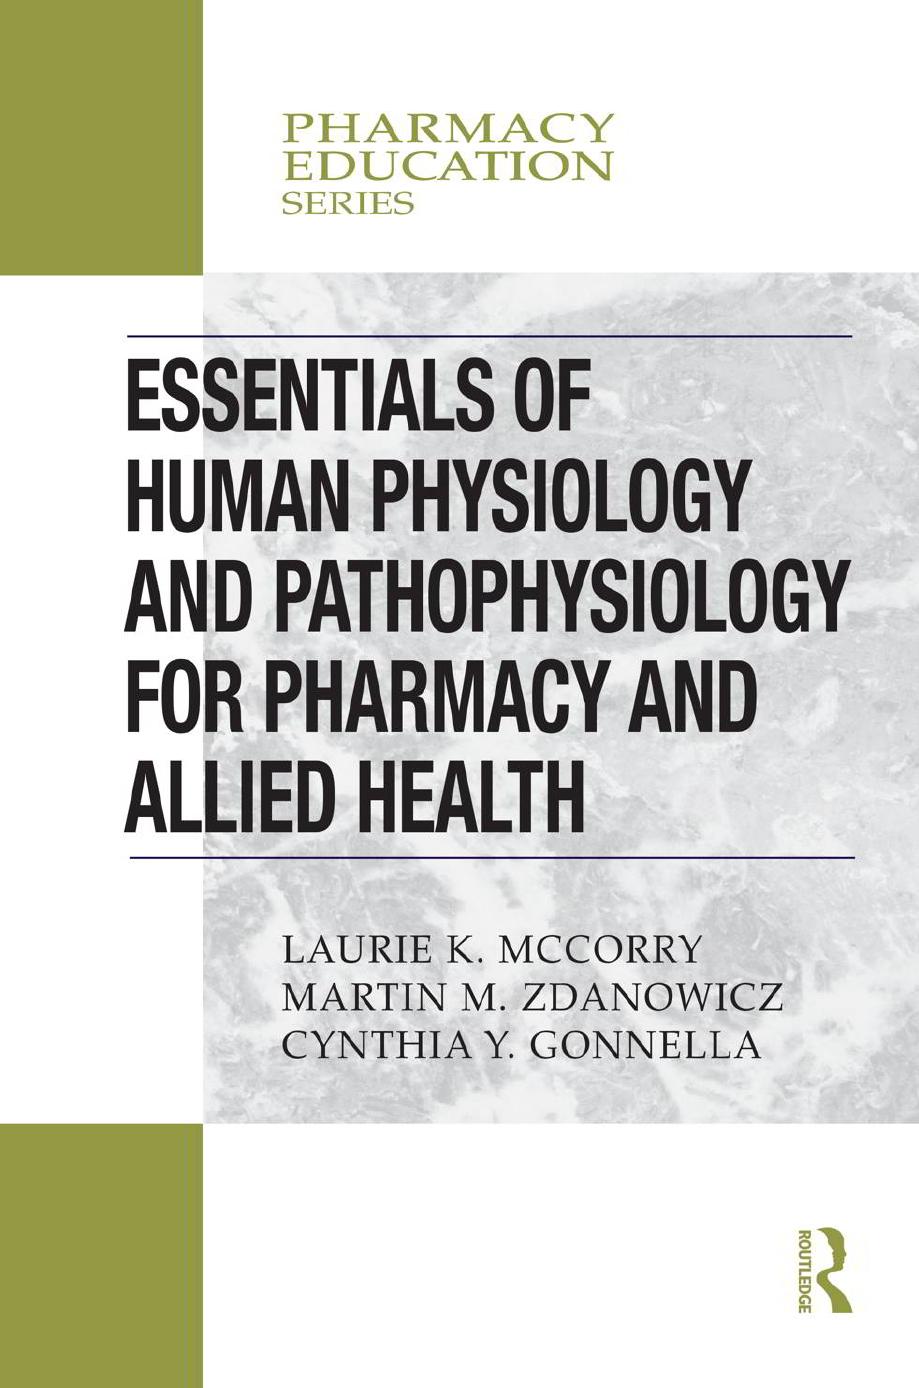 Essentials of Human Physiology and Pathophysiology for Pharmacy and Allied Health